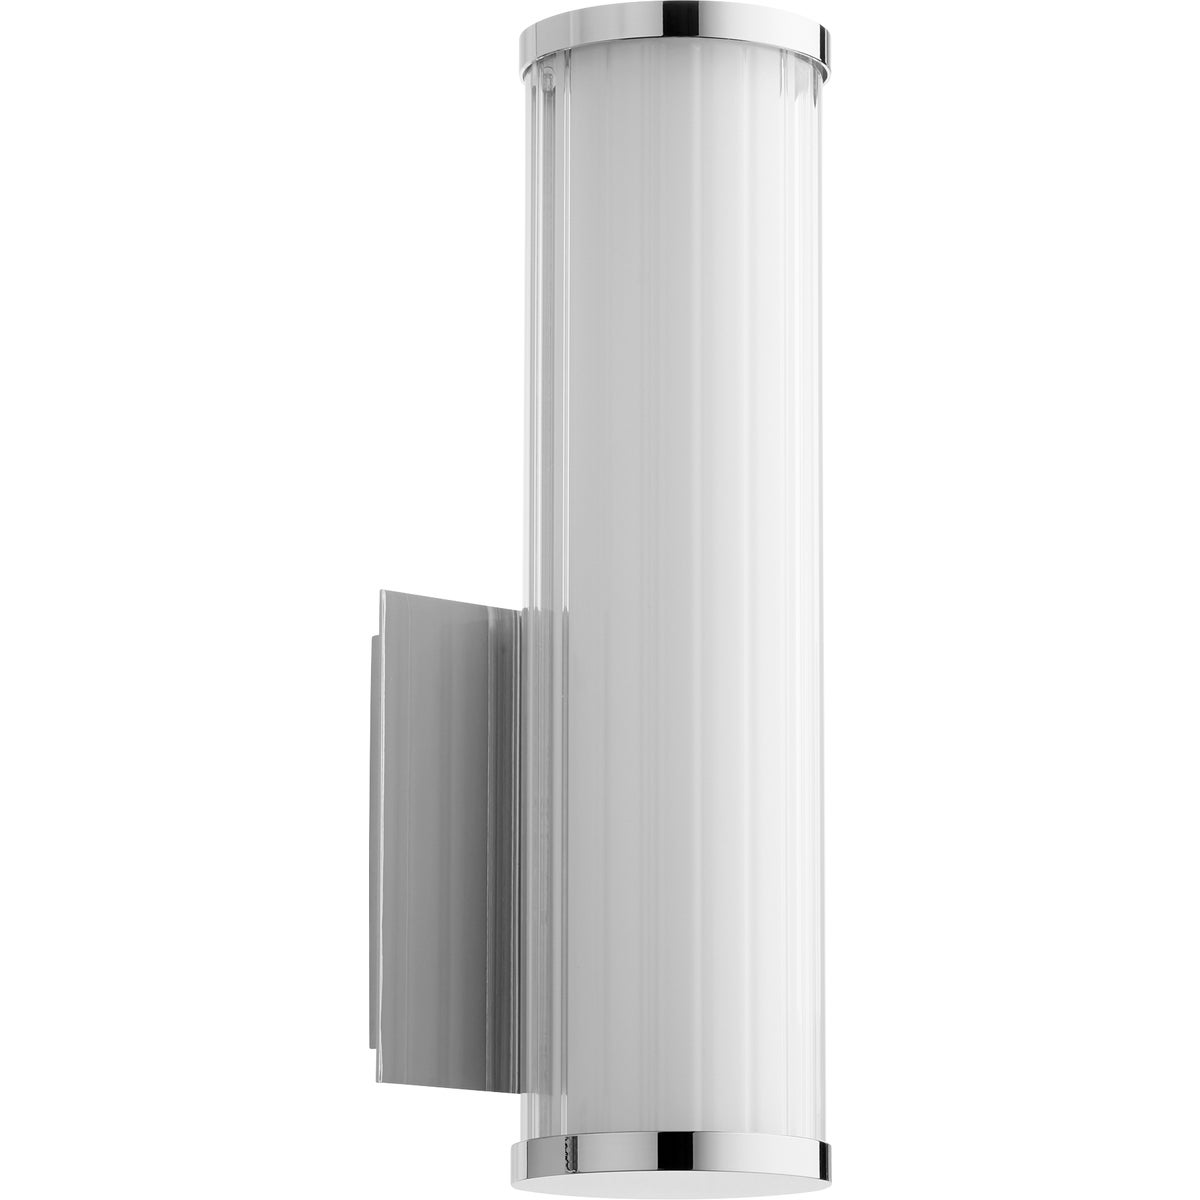 LED Wall Sconce with clean lines, perfect for modern applications. Subtle sophistication in a 5.13&quot;W x 12.5&quot;H x 4&quot;E fixture. 9W, 689 lumens, 3000K color temperature. UL Listed, damp location rated. 2-year warranty.